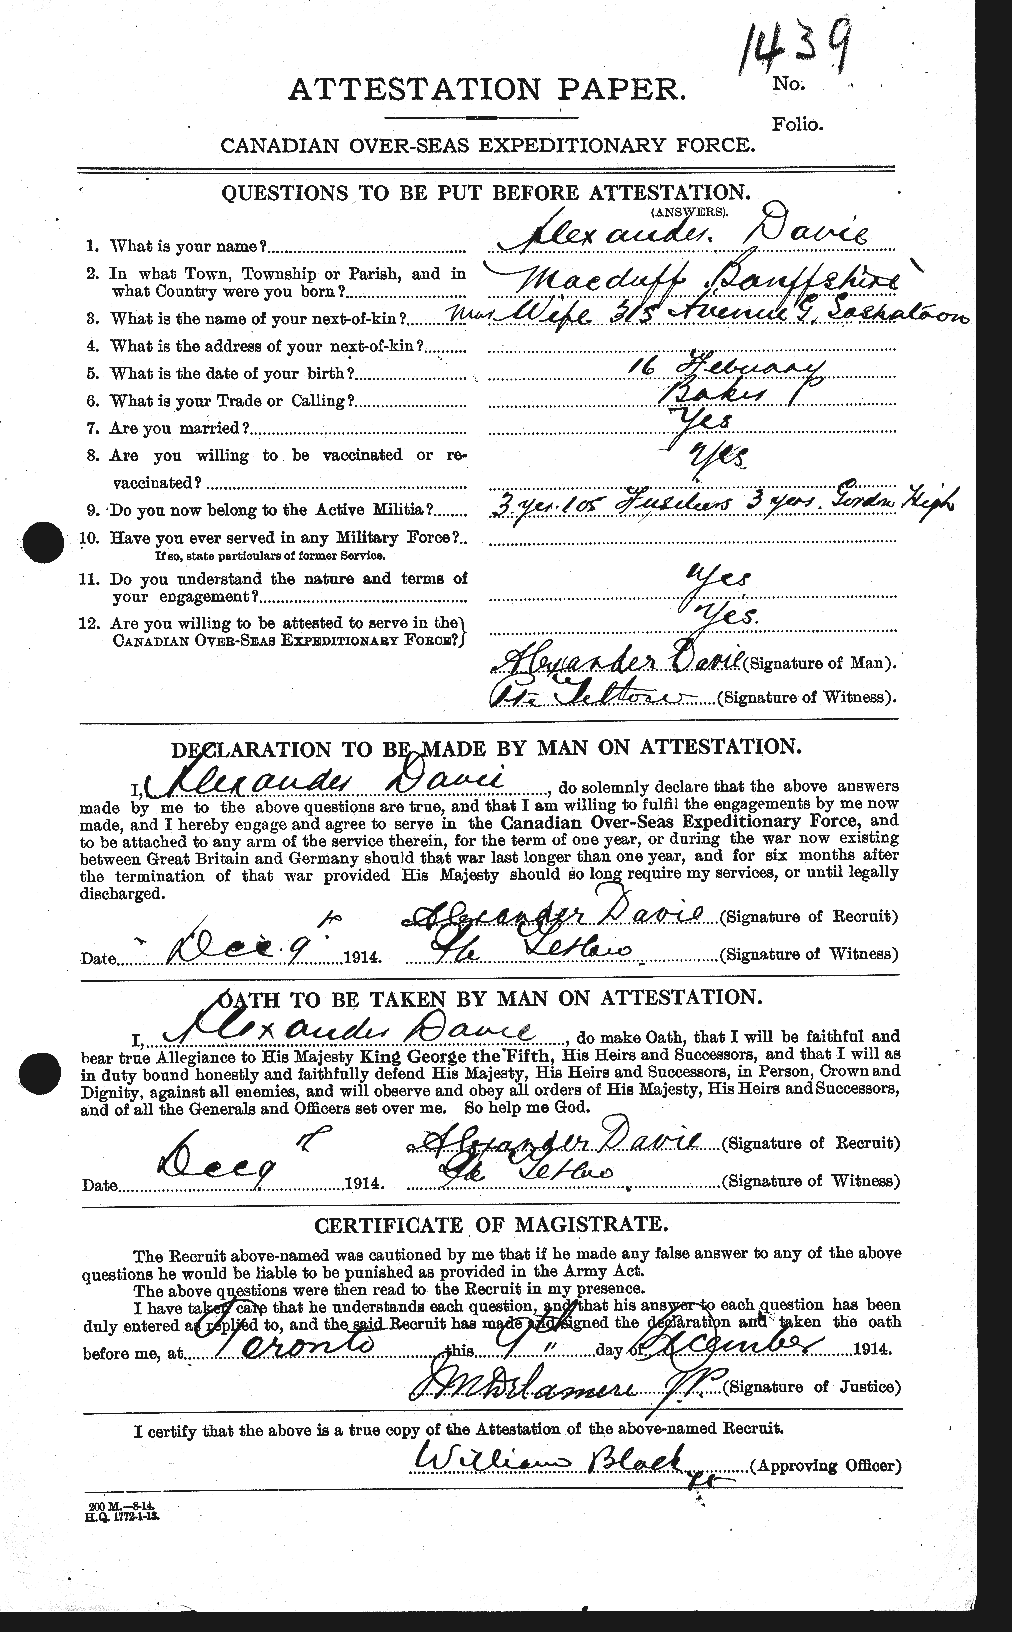 Personnel Records of the First World War - CEF 278807a